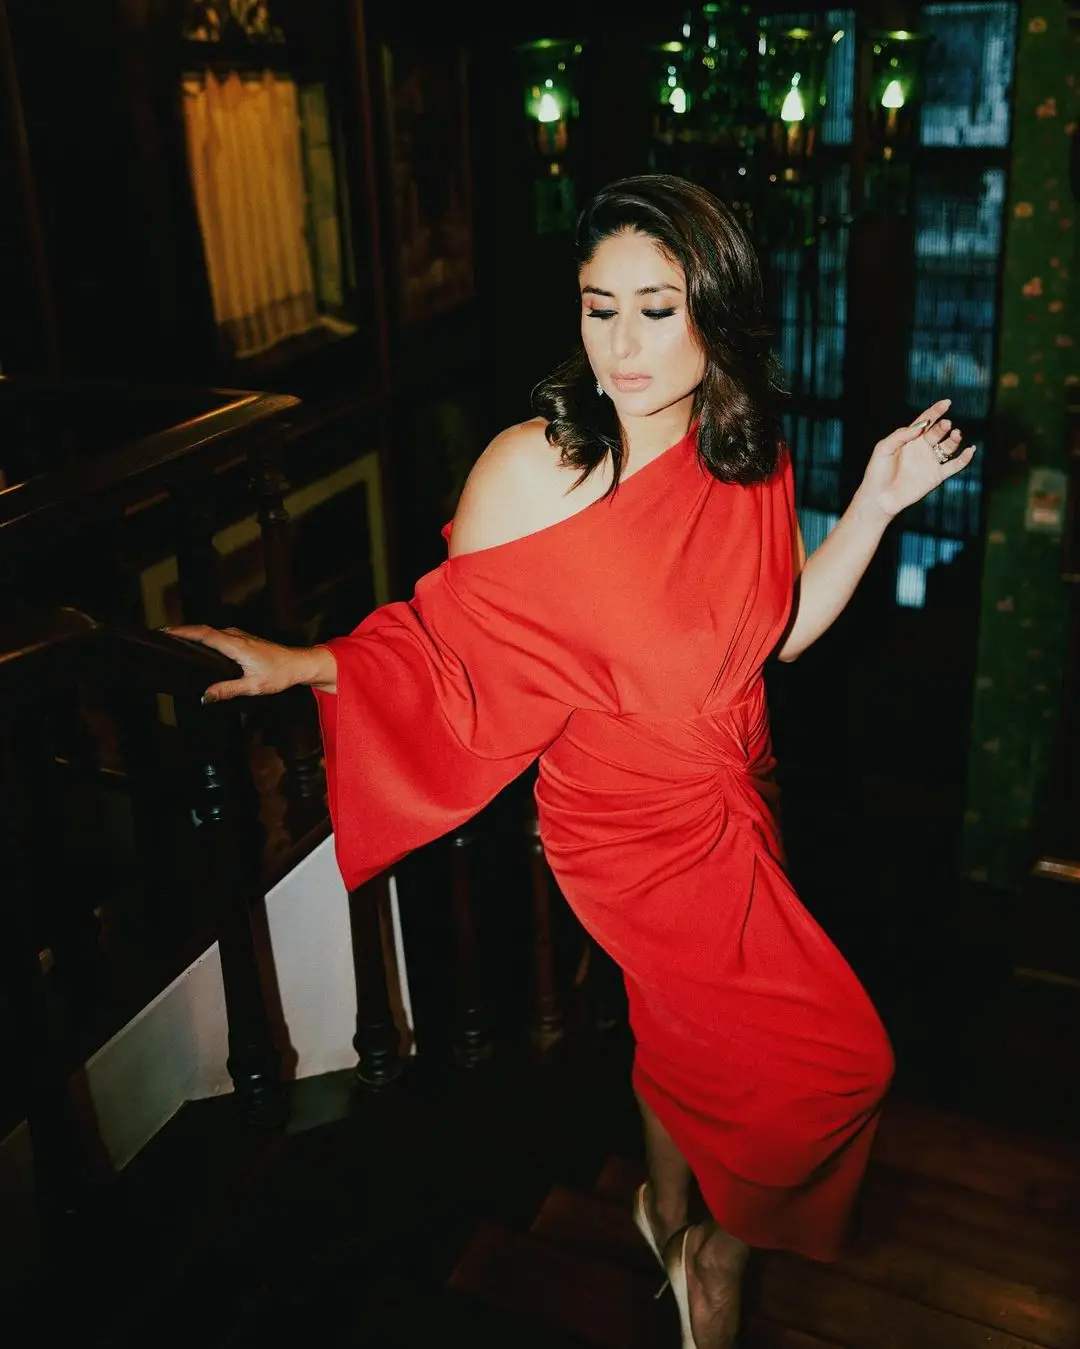 BOLLYWOOD ACTRESS KAREENA KAPOOR PHOTOSHOOT IN RED GOWN 2